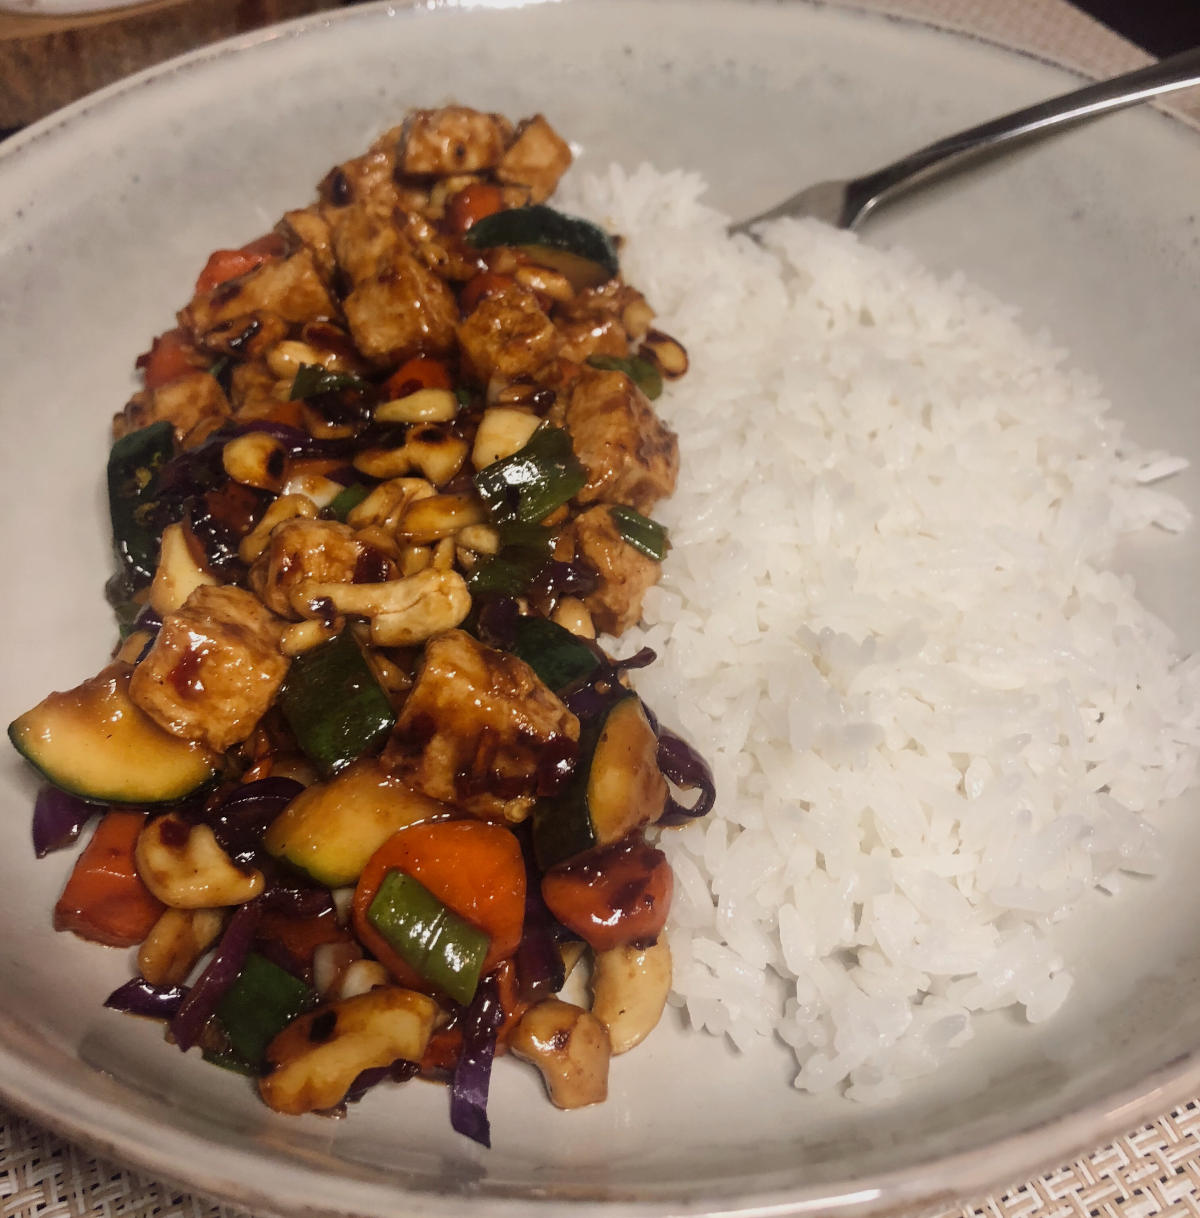 Final product: Kung Pow Chicken and veggies